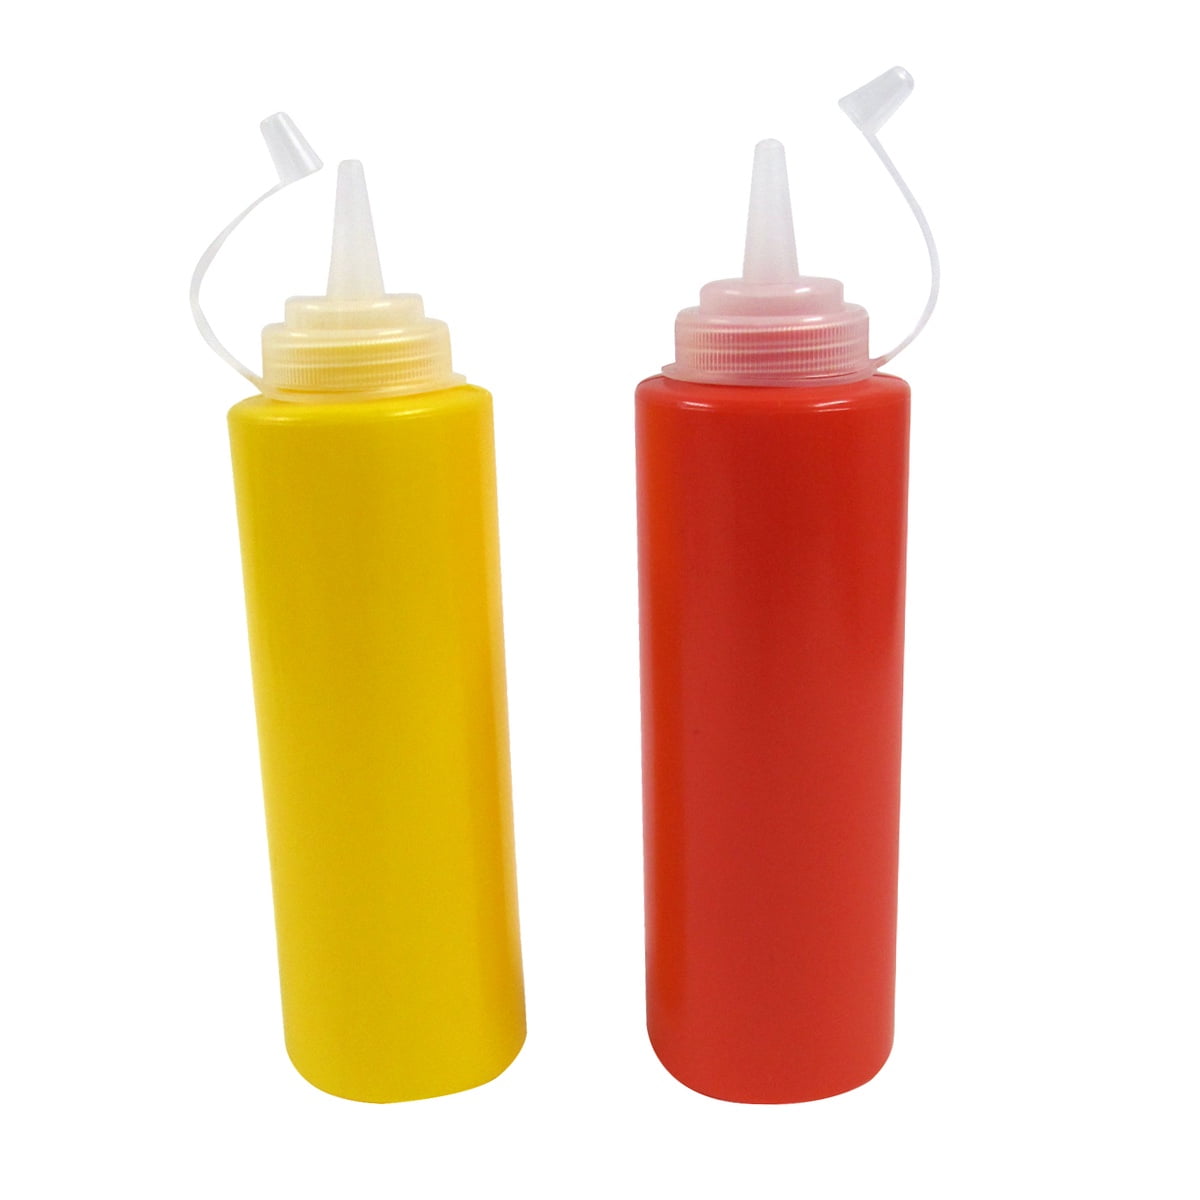 Mayo/Ketchup/Mustard Set of 3 Widemouth Sauce Bottle 16oz Clear/Red/Yellow 